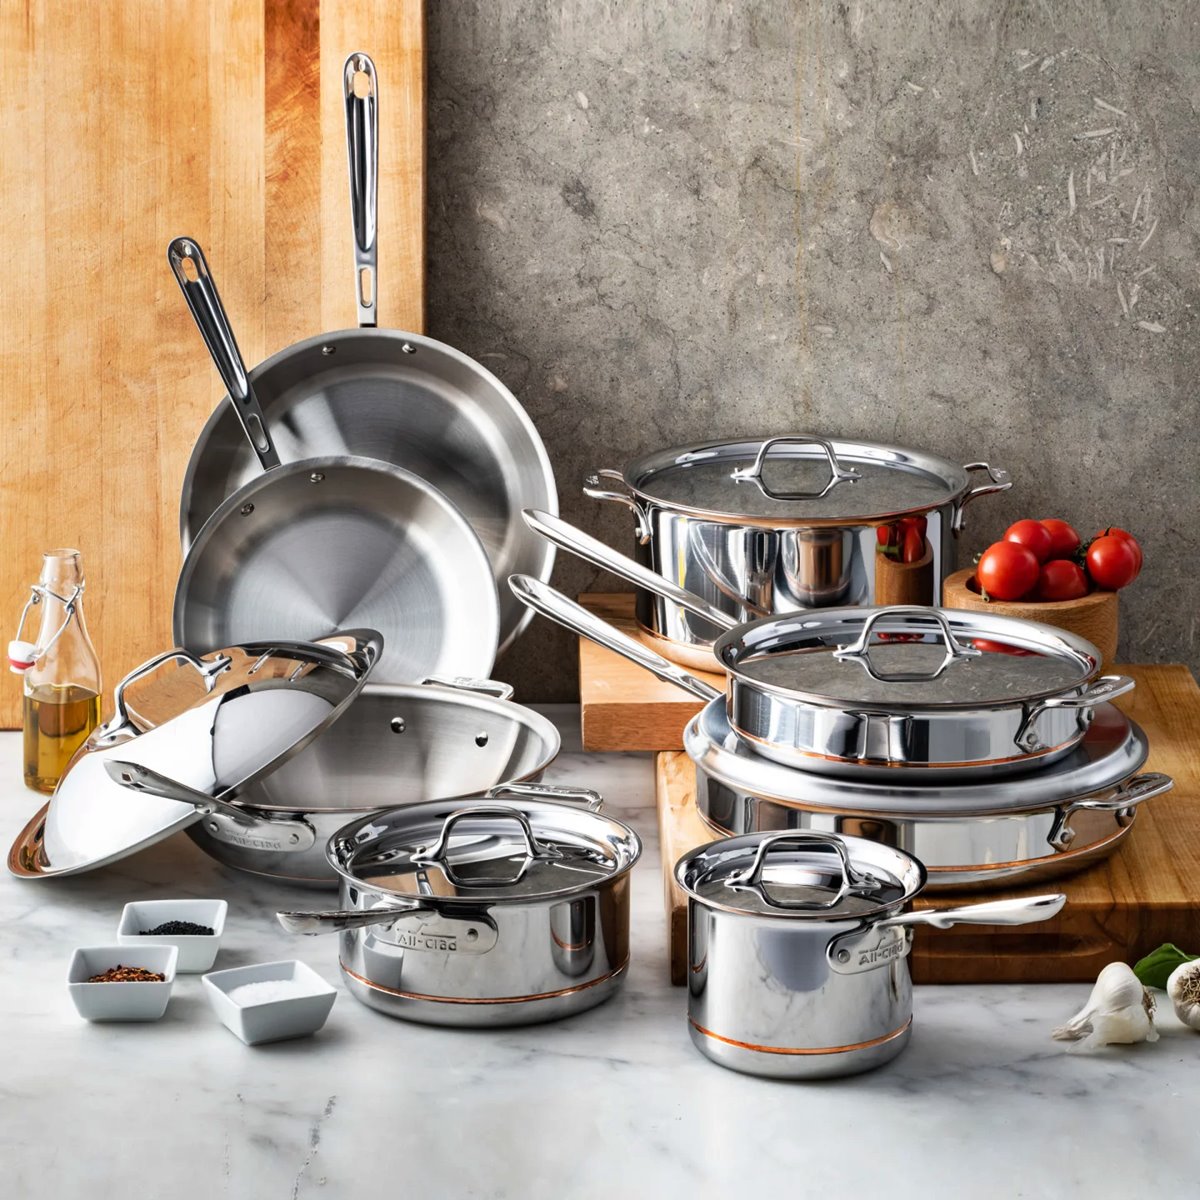 All-Clad All-Clad Copper Core 14-Piece Cookware Set